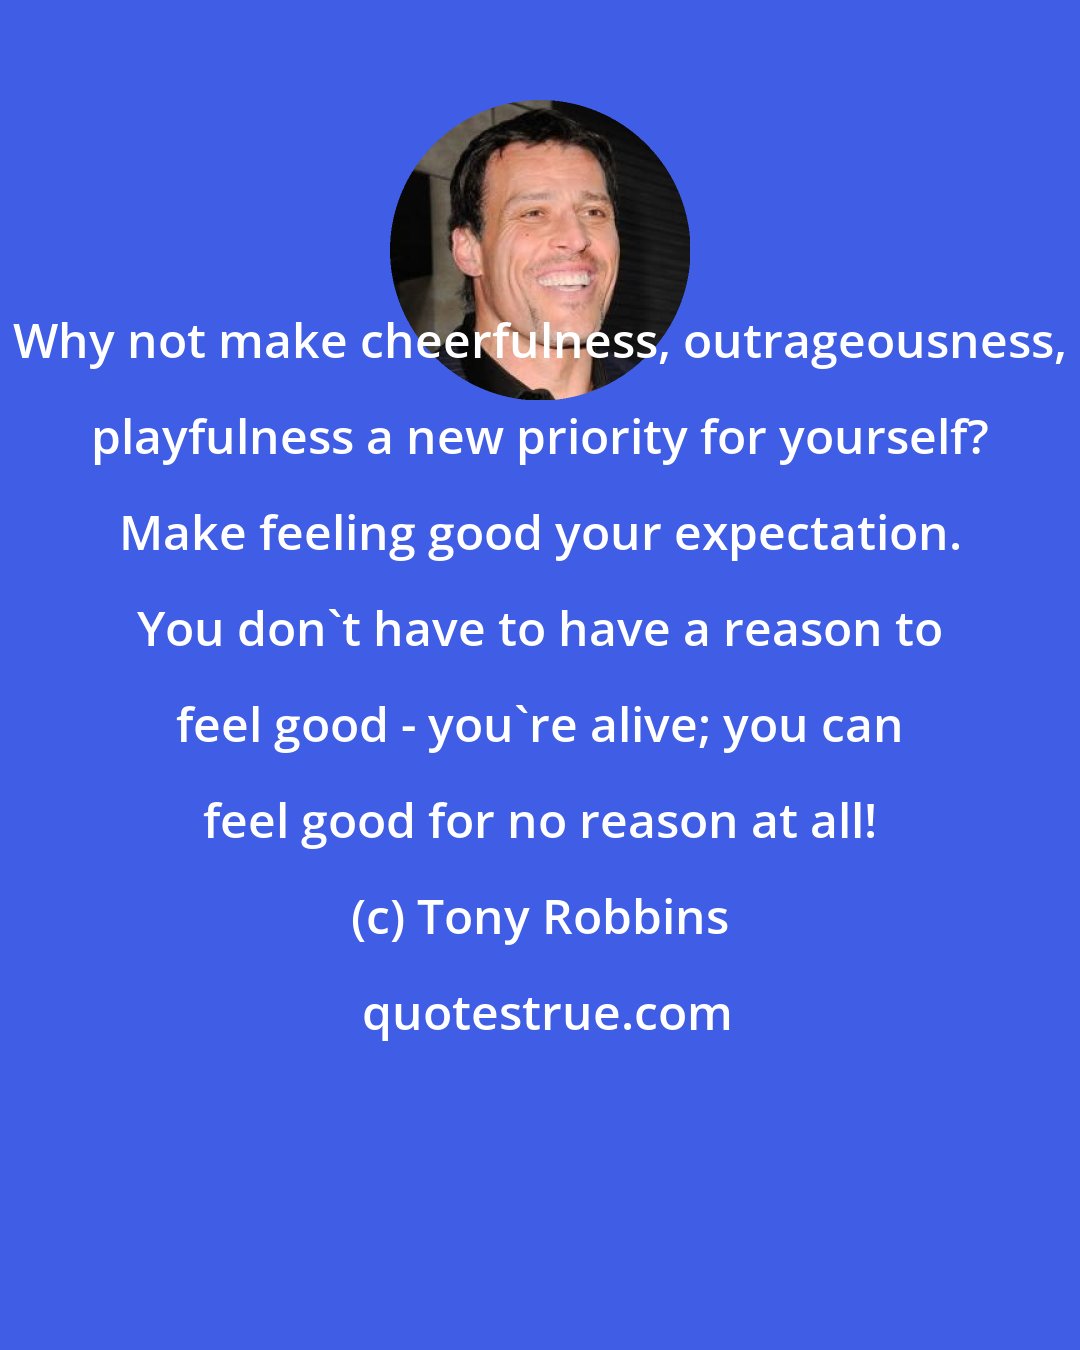 Tony Robbins: Why not make cheerfulness, outrageousness, playfulness a new priority for yourself? Make feeling good your expectation. You don't have to have a reason to feel good - you're alive; you can feel good for no reason at all!